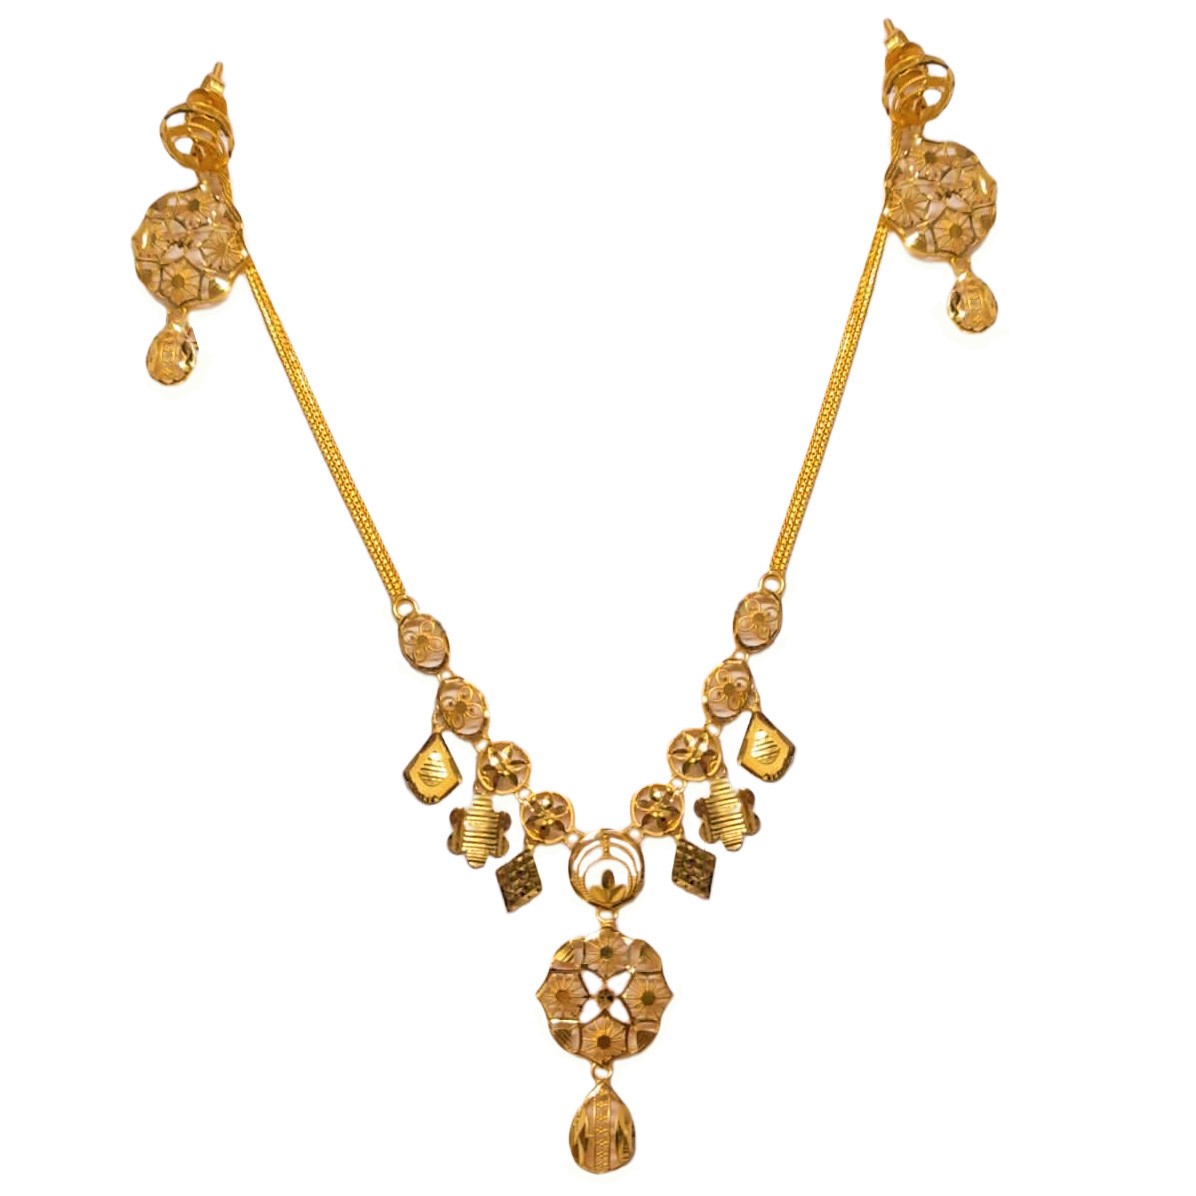 NECKLACE FOR WOMEN BY WHP - WHP Jewellers